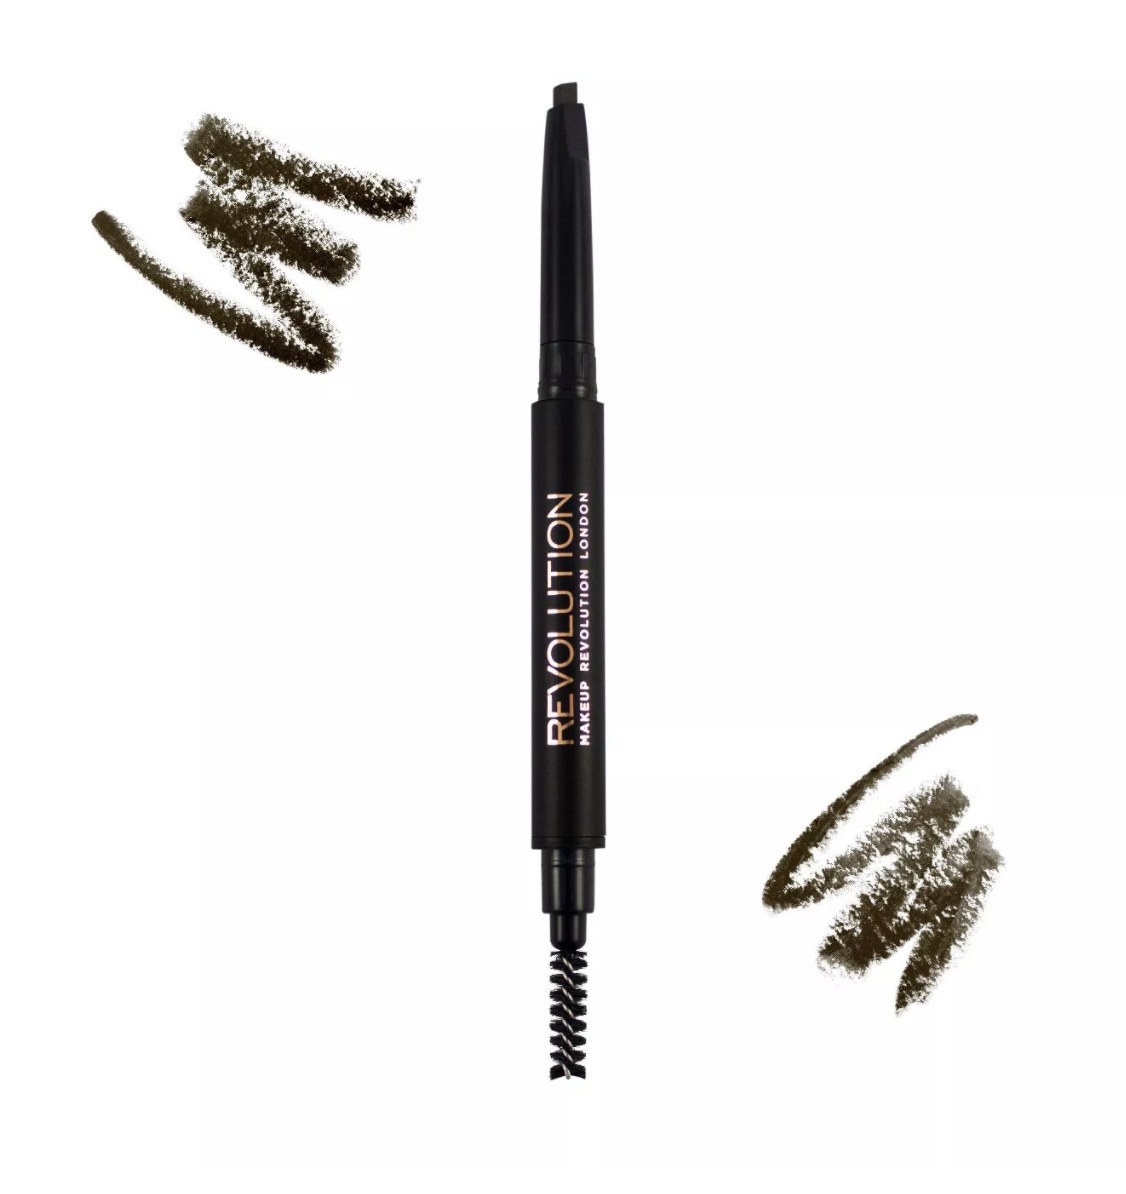 The black brow pencil says &quot;REVOLUTION&quot; in shiny lettering and has one pencil side and a brush side